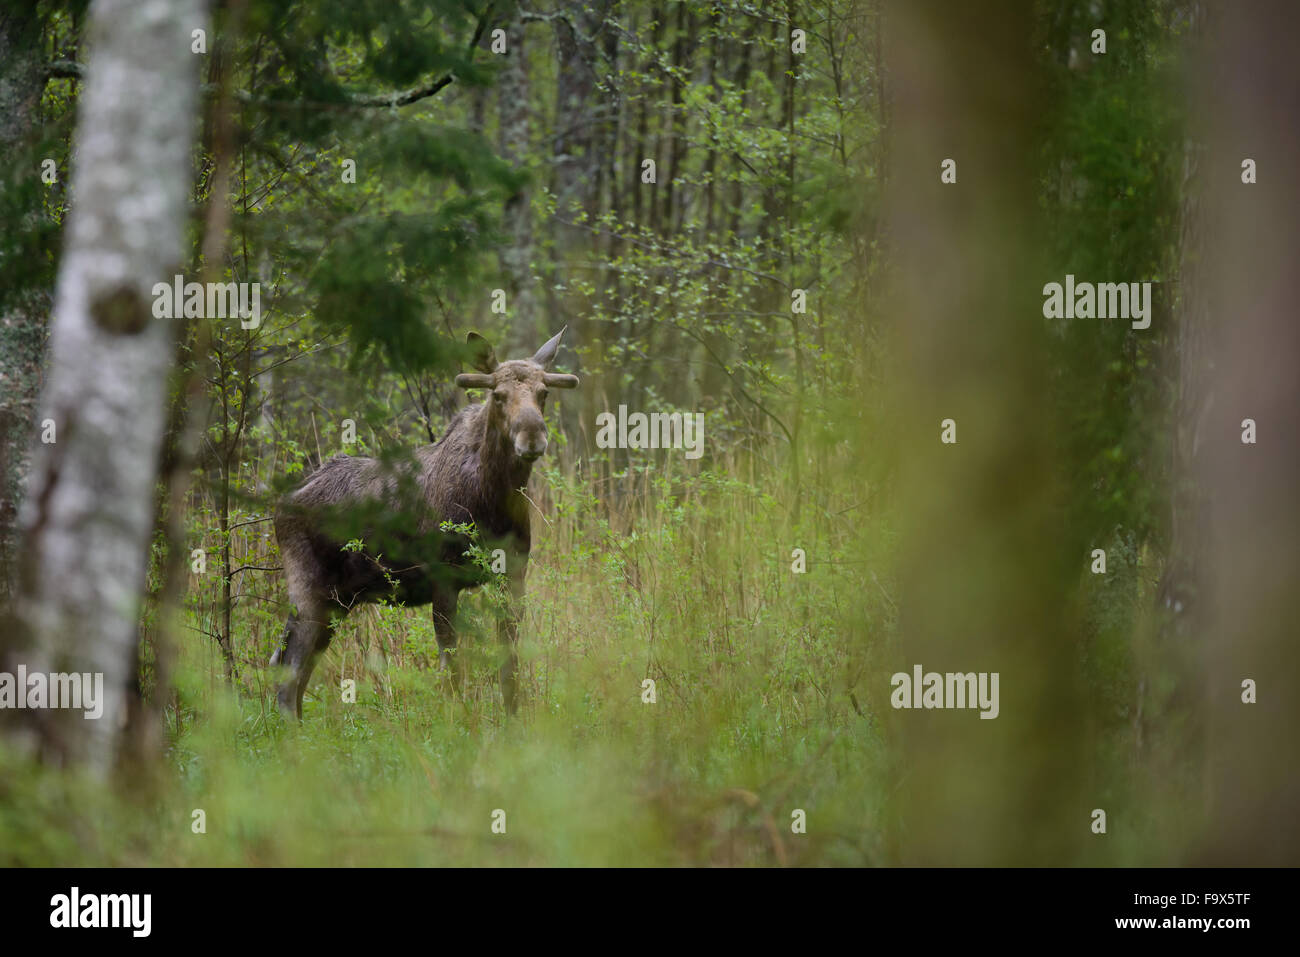 A bull moose (Alces alce) stands in a lush forest in Estonia. Stock Photo